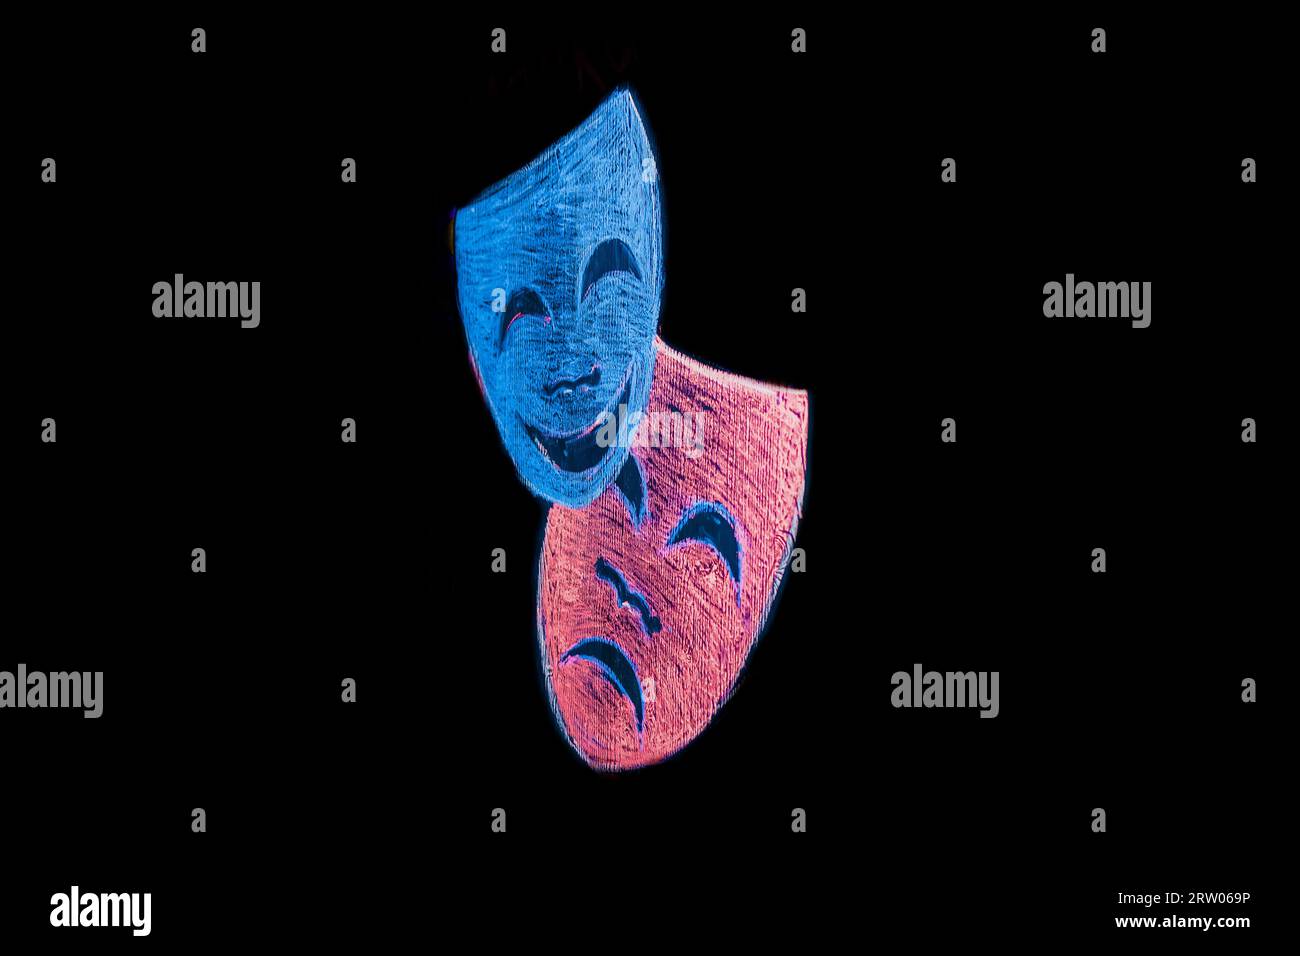 Masks show 2 colored masks sad and cheerful in the black background. Stock Photo